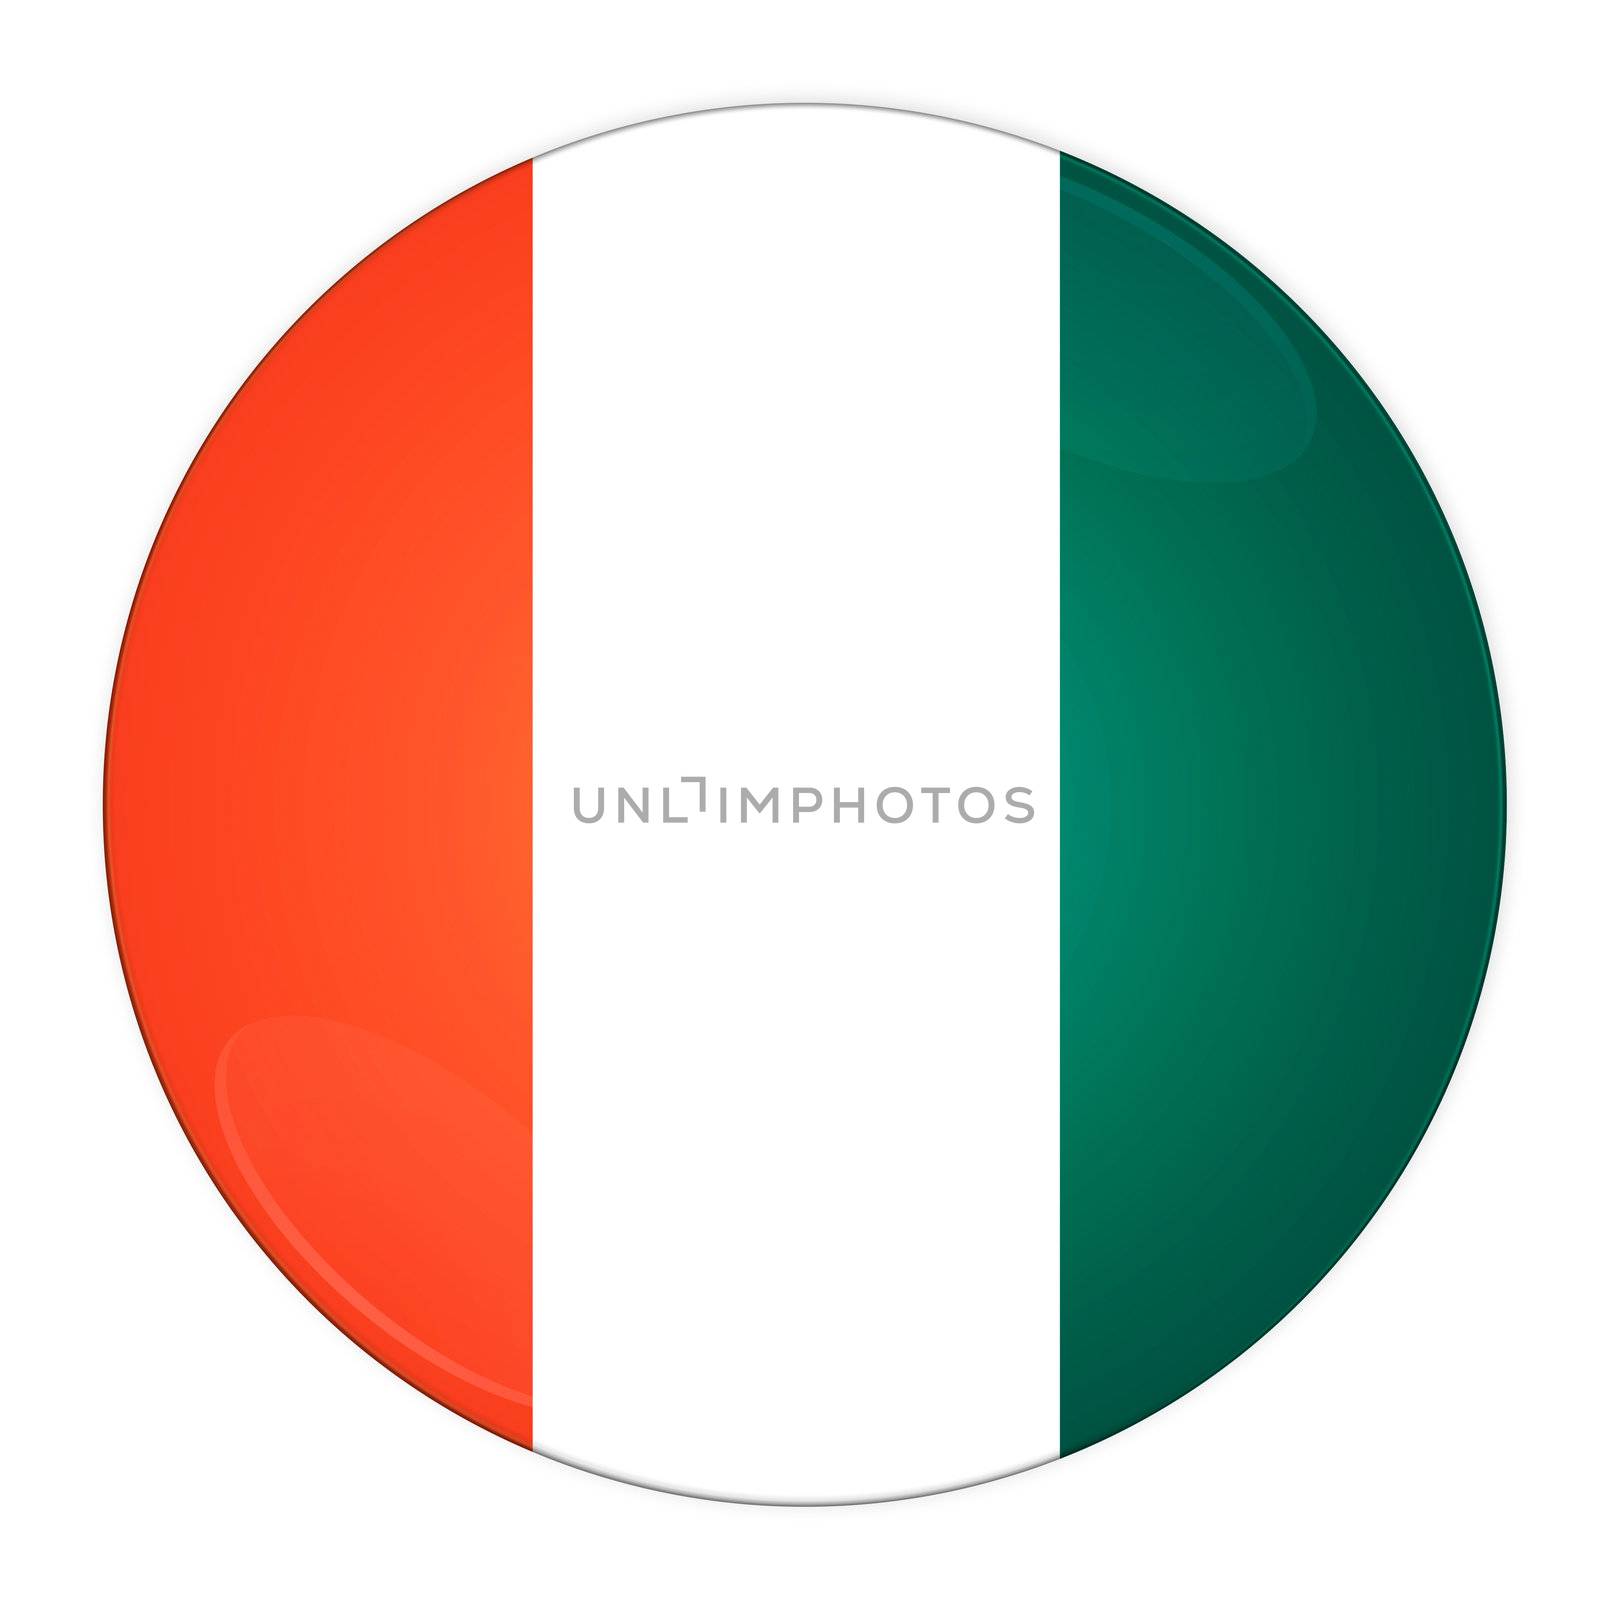 Abstract illustration: button with flag from Cote d'Ivoire country